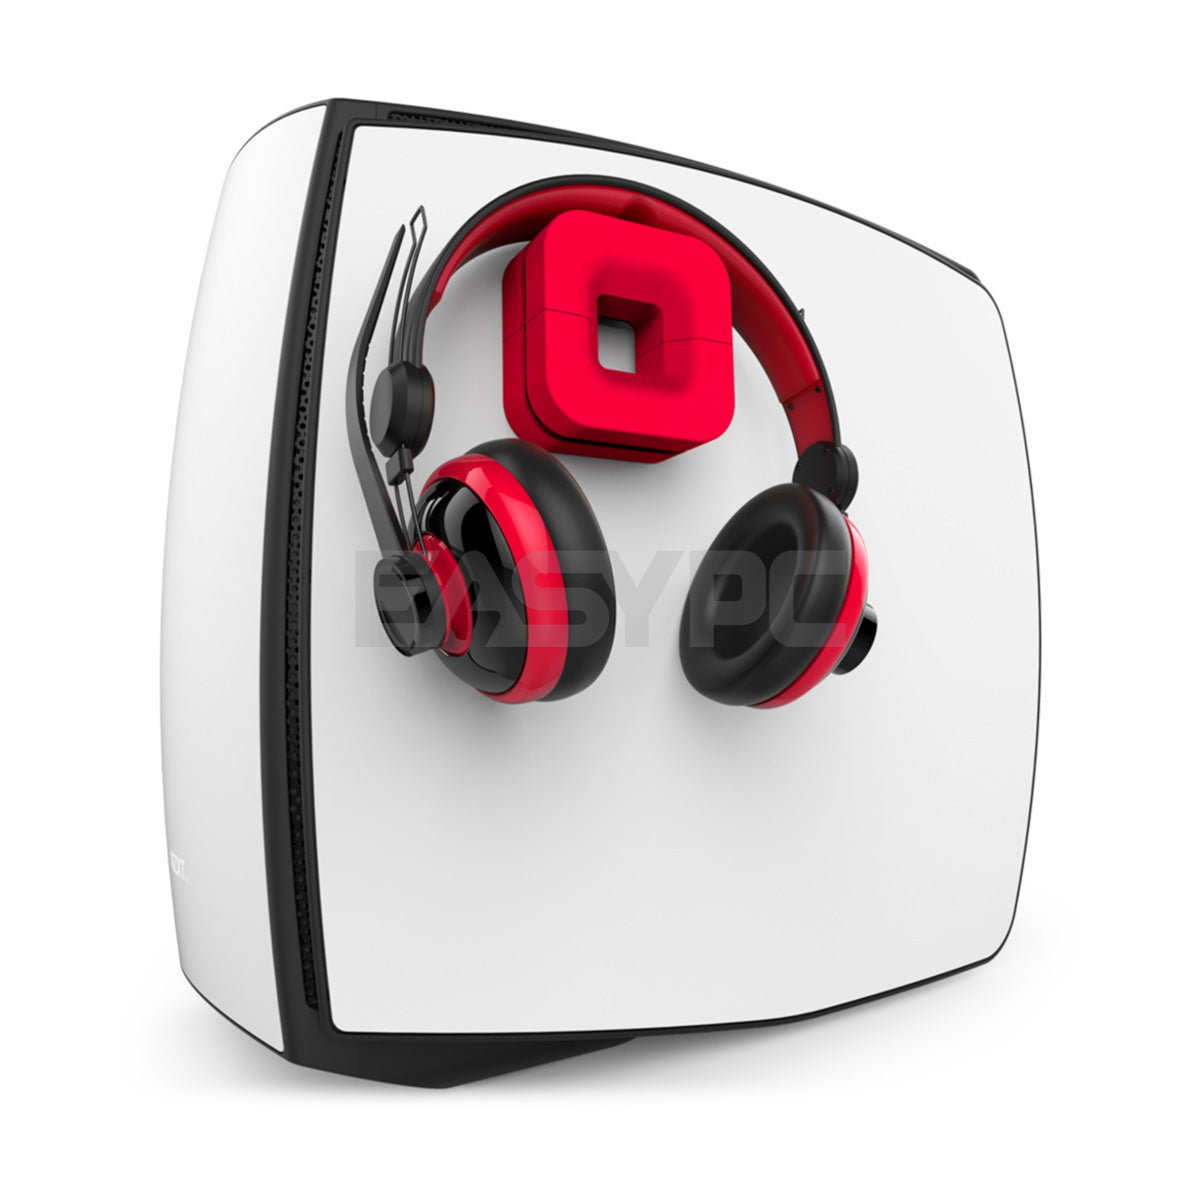 NZXT Puck BA-PUCKR-RD Red